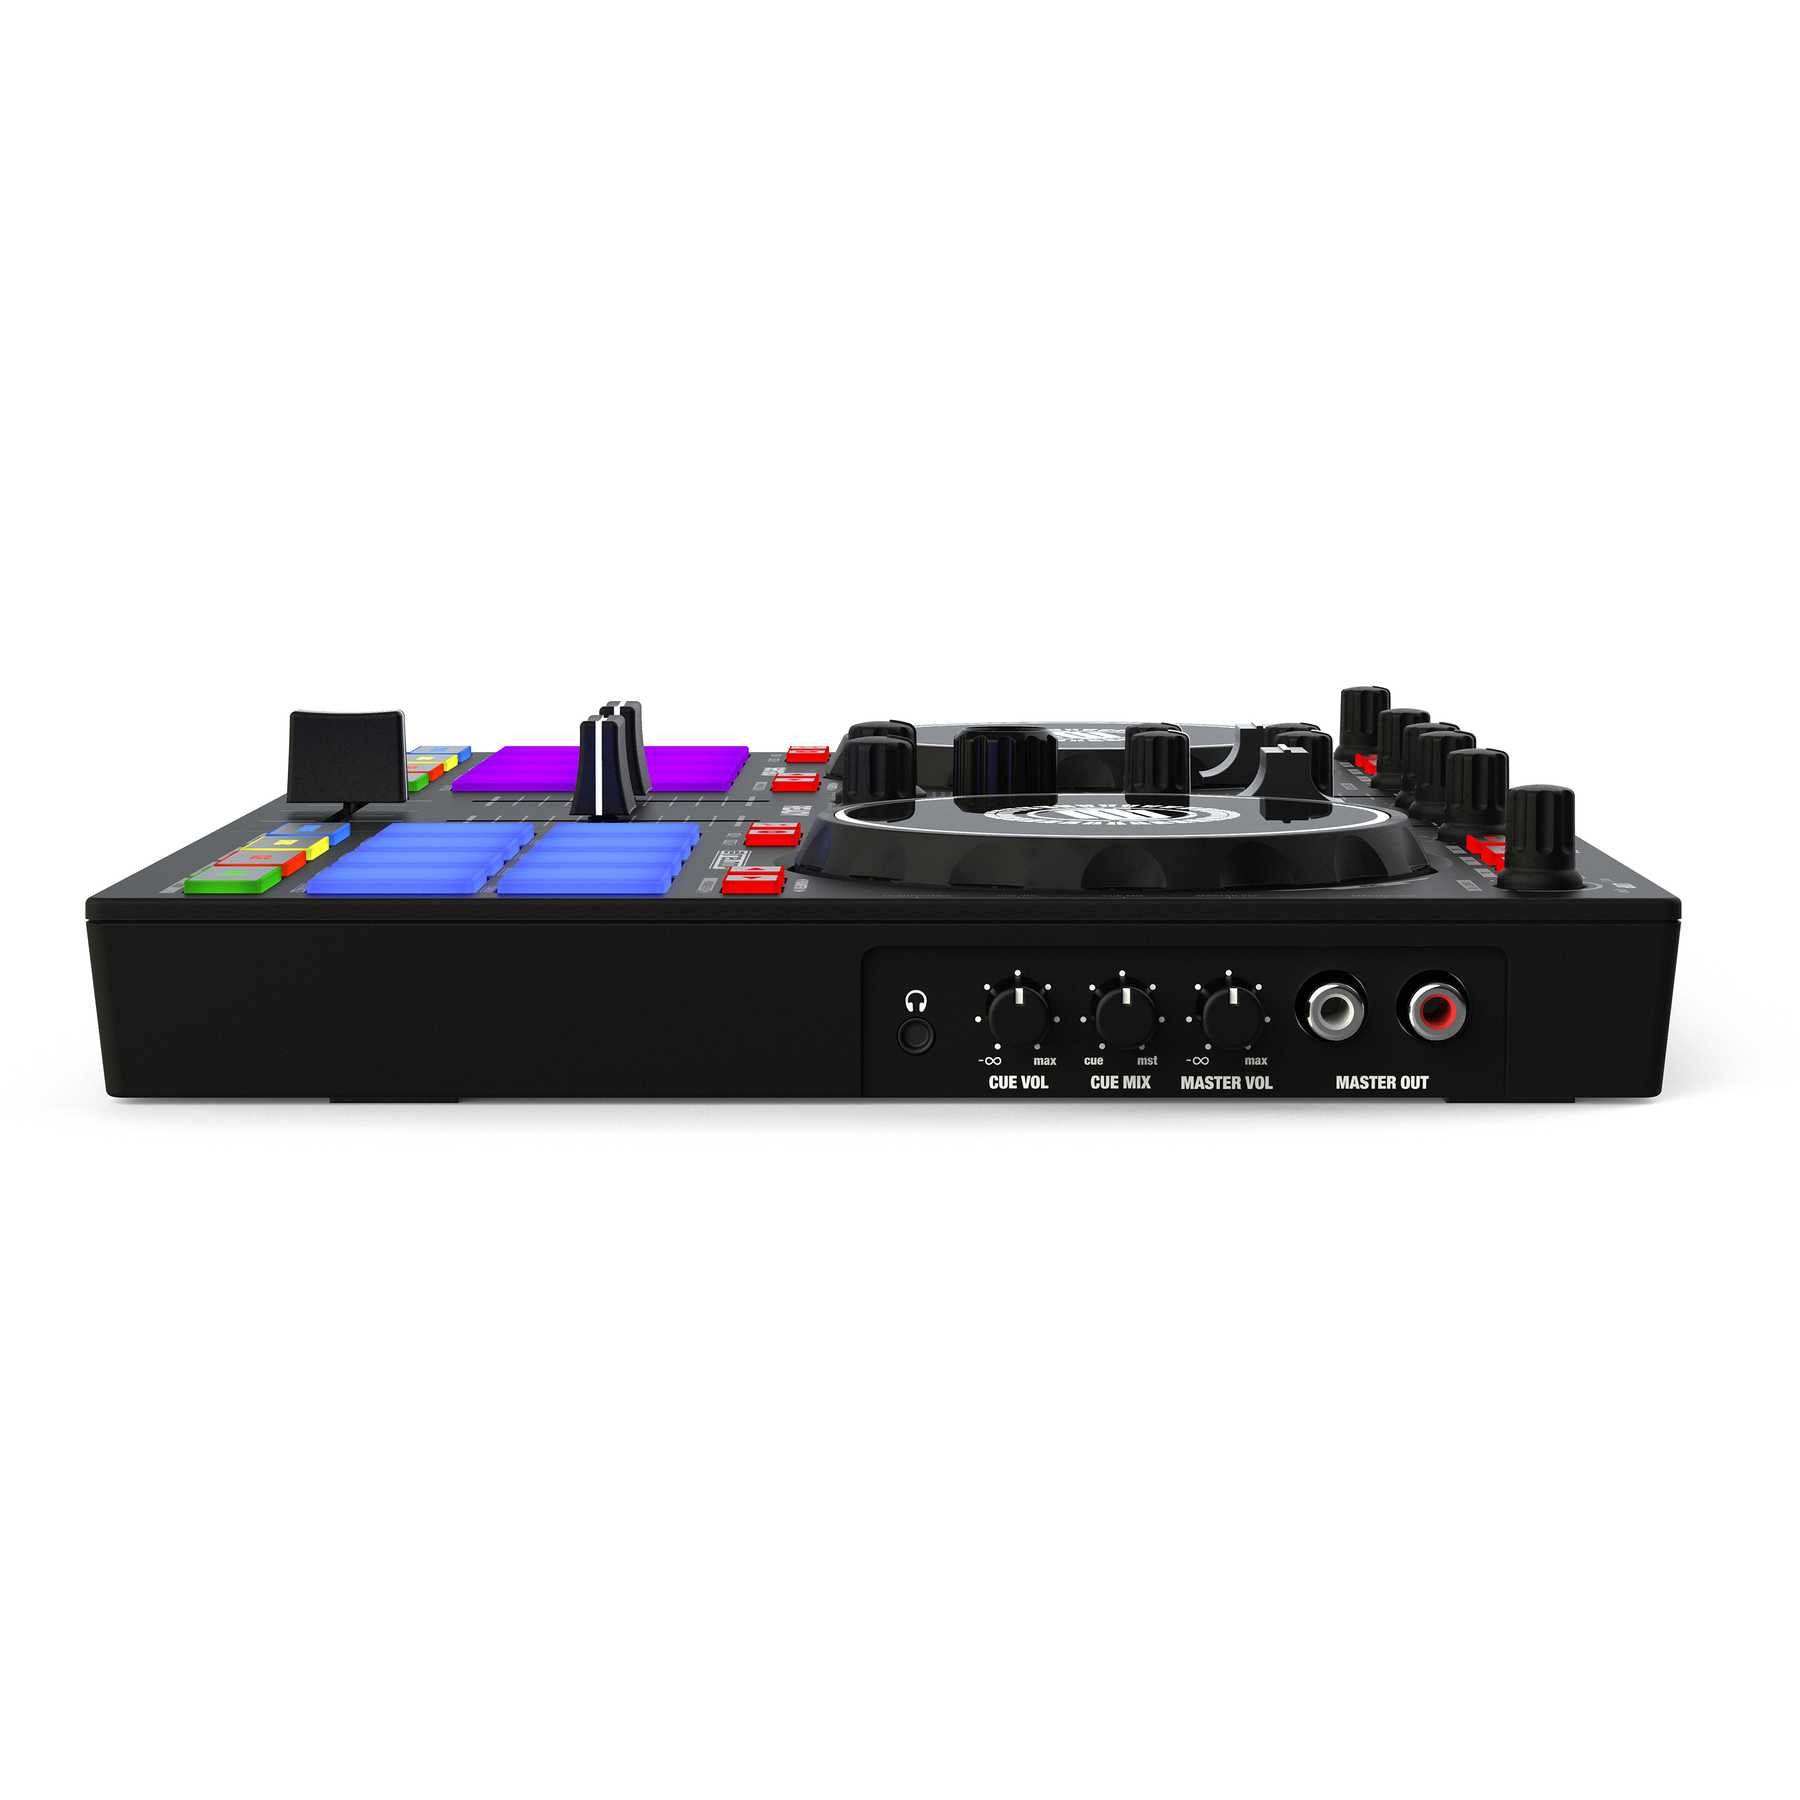 Reloop READY High-performance compact controller for Serato